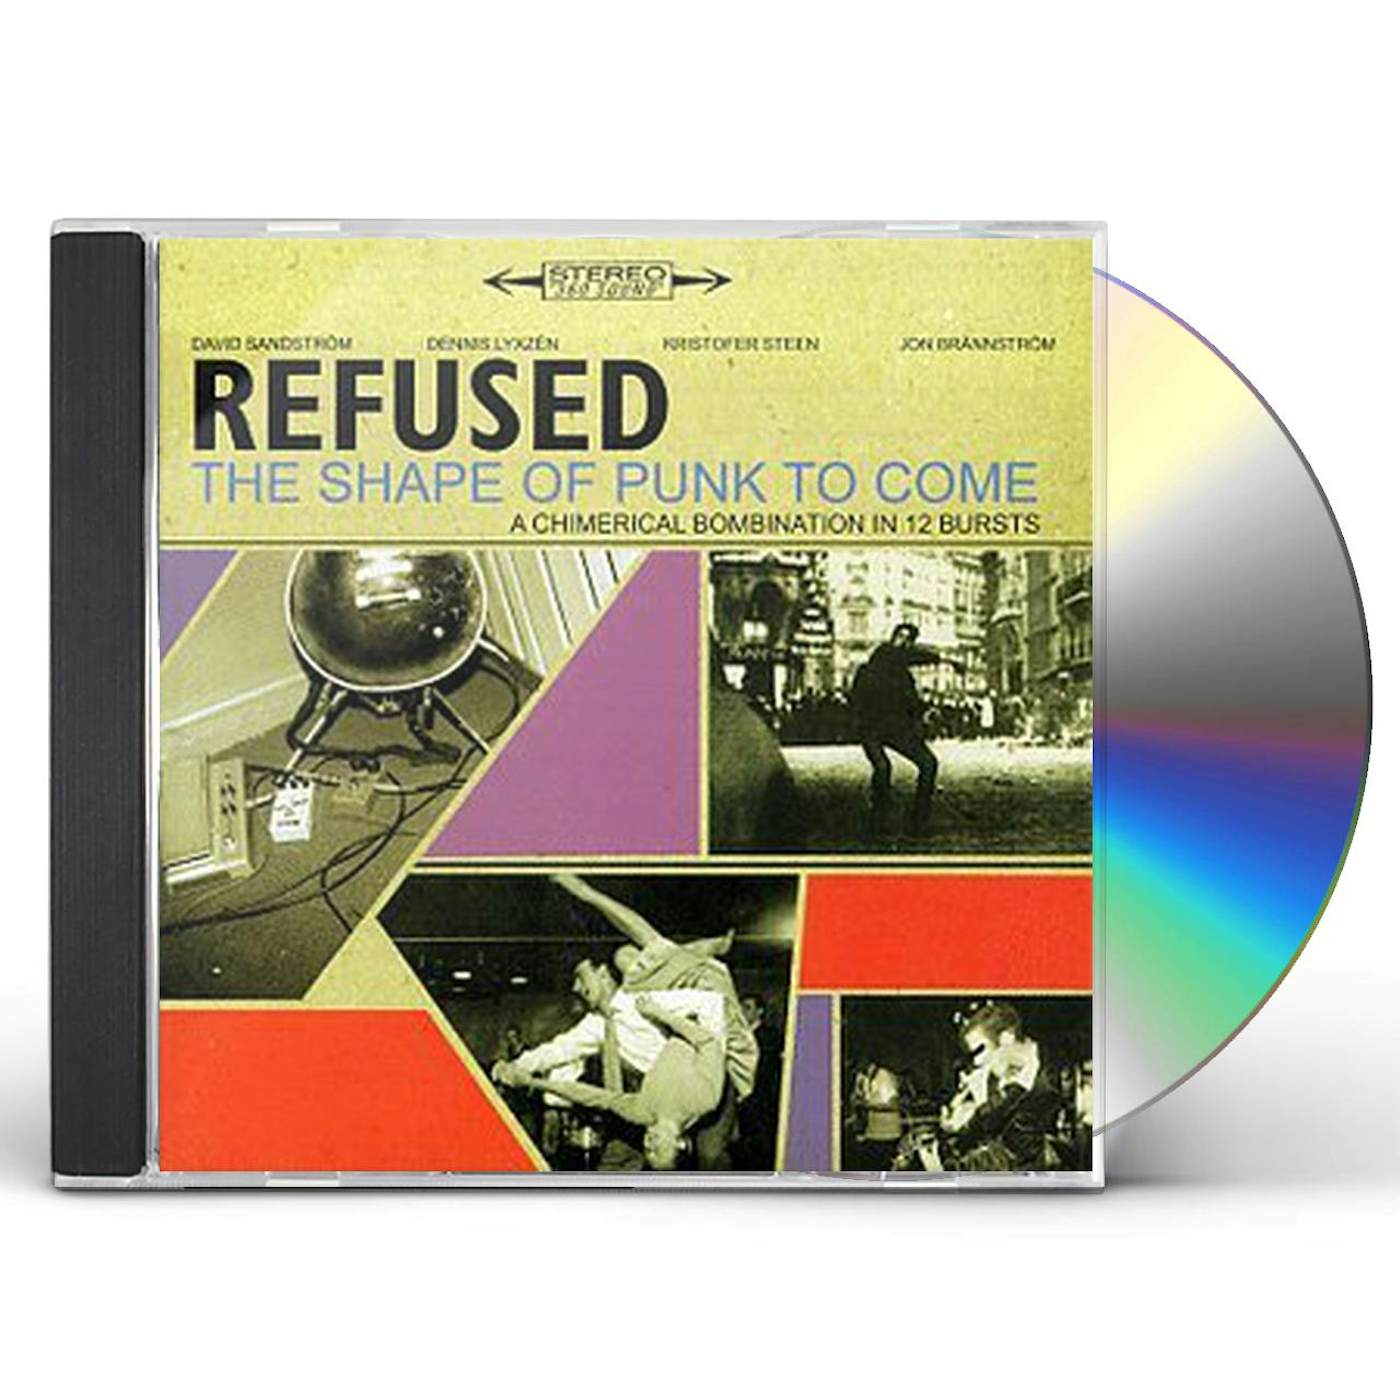 Refused SHAPE OF PUNK TO COME - CHIMERICAL BOMBINATION IN CD